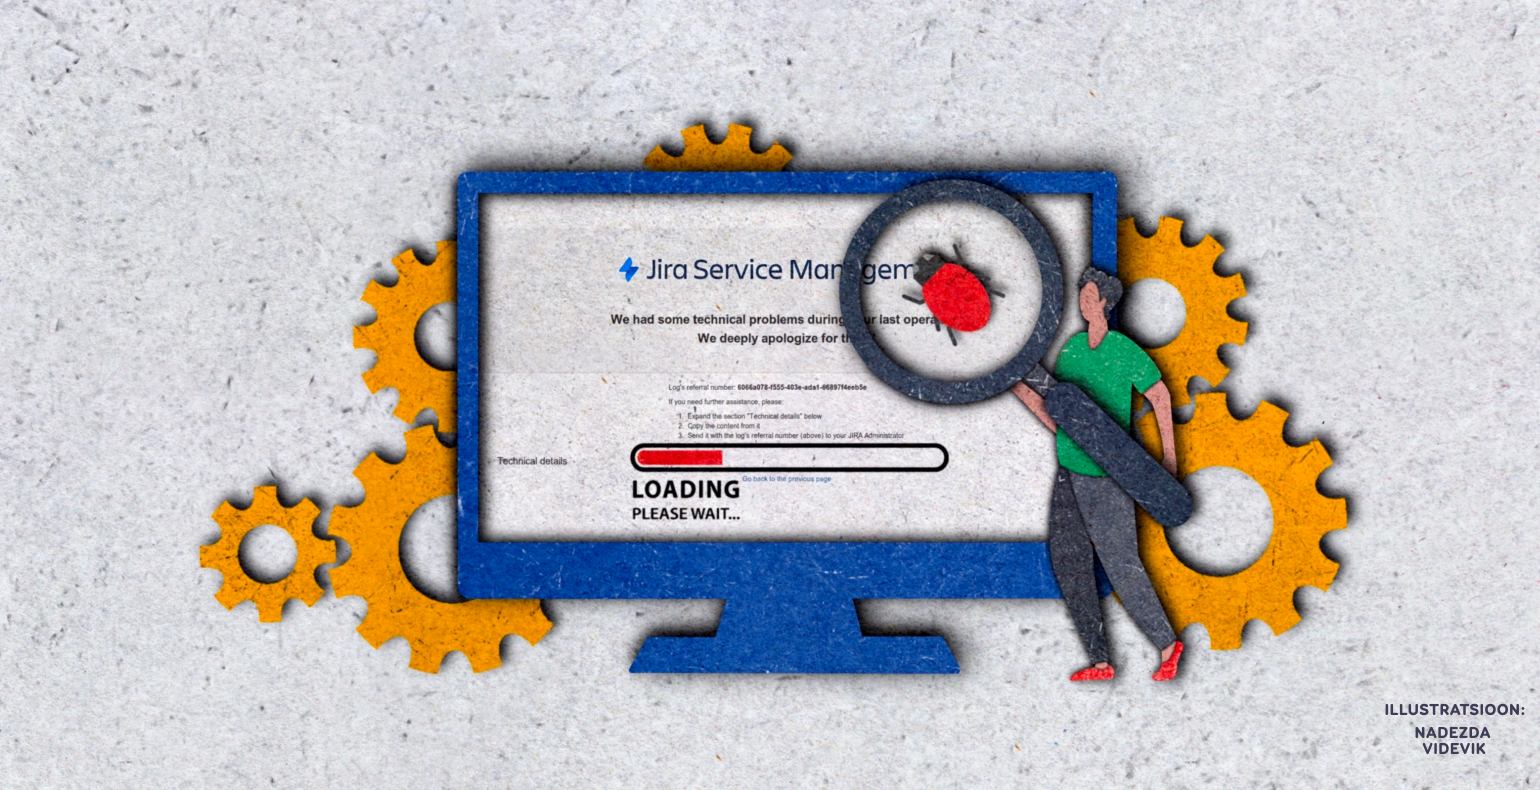 Illustration of a system bug that has an impact on Jira Service Management functionalities.